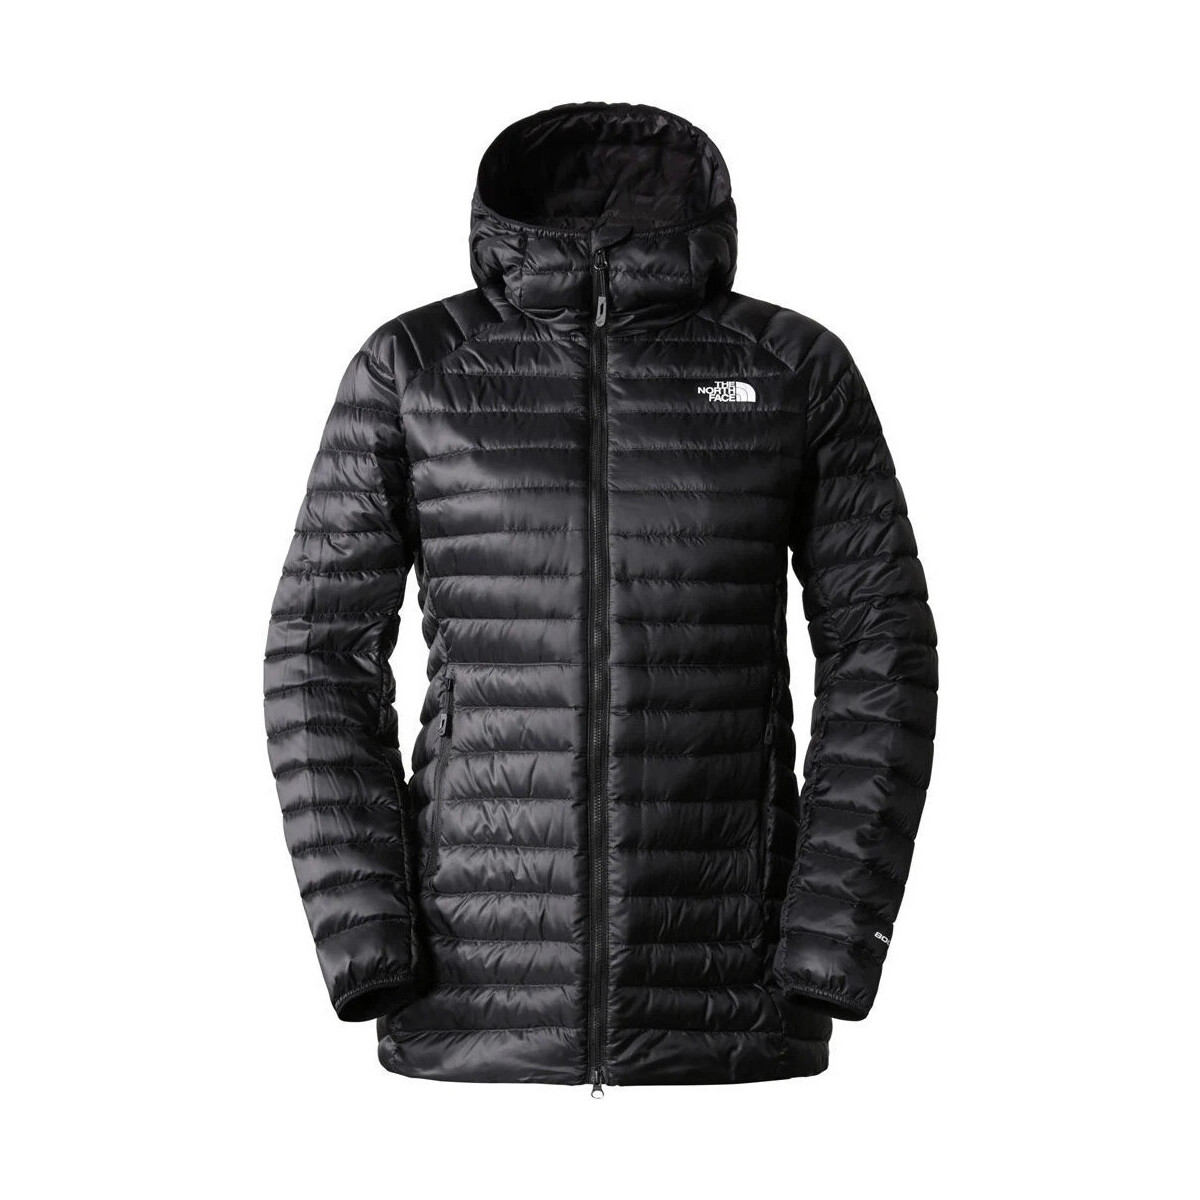 textil Mujer Chaquetas de deporte The North Face W NEW TREVAIL PARKA Negro